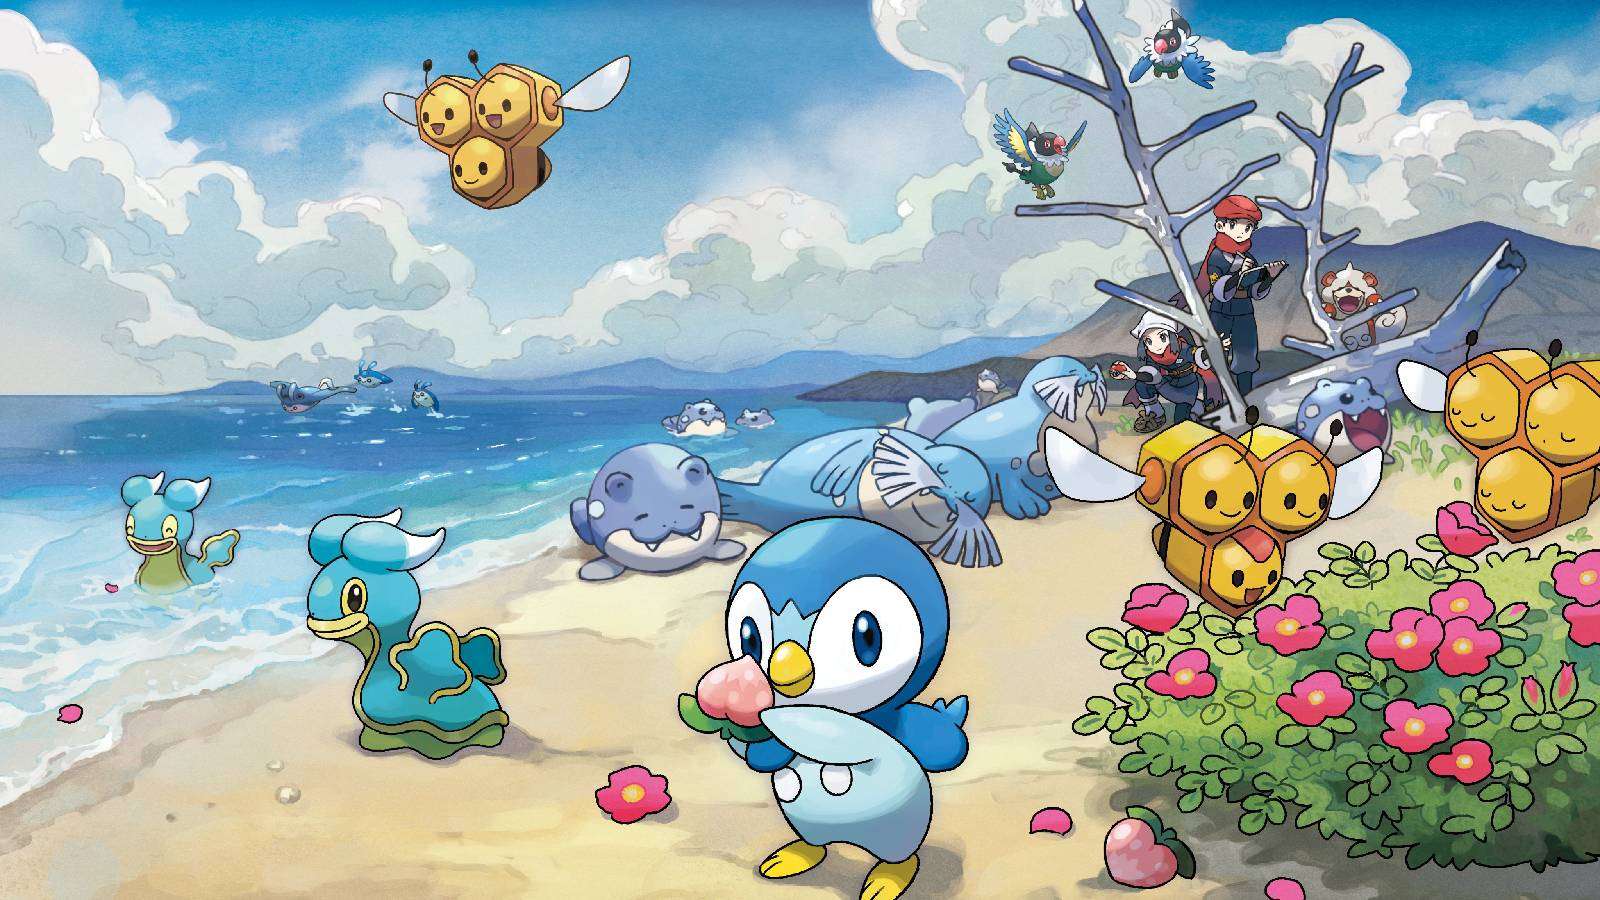 Promotional illustrated artwork for Pokémon Legend: Arceus shows several Pokémon - inclduing Piplup, Combee, and Spheal - all relaxing and exploring a beach